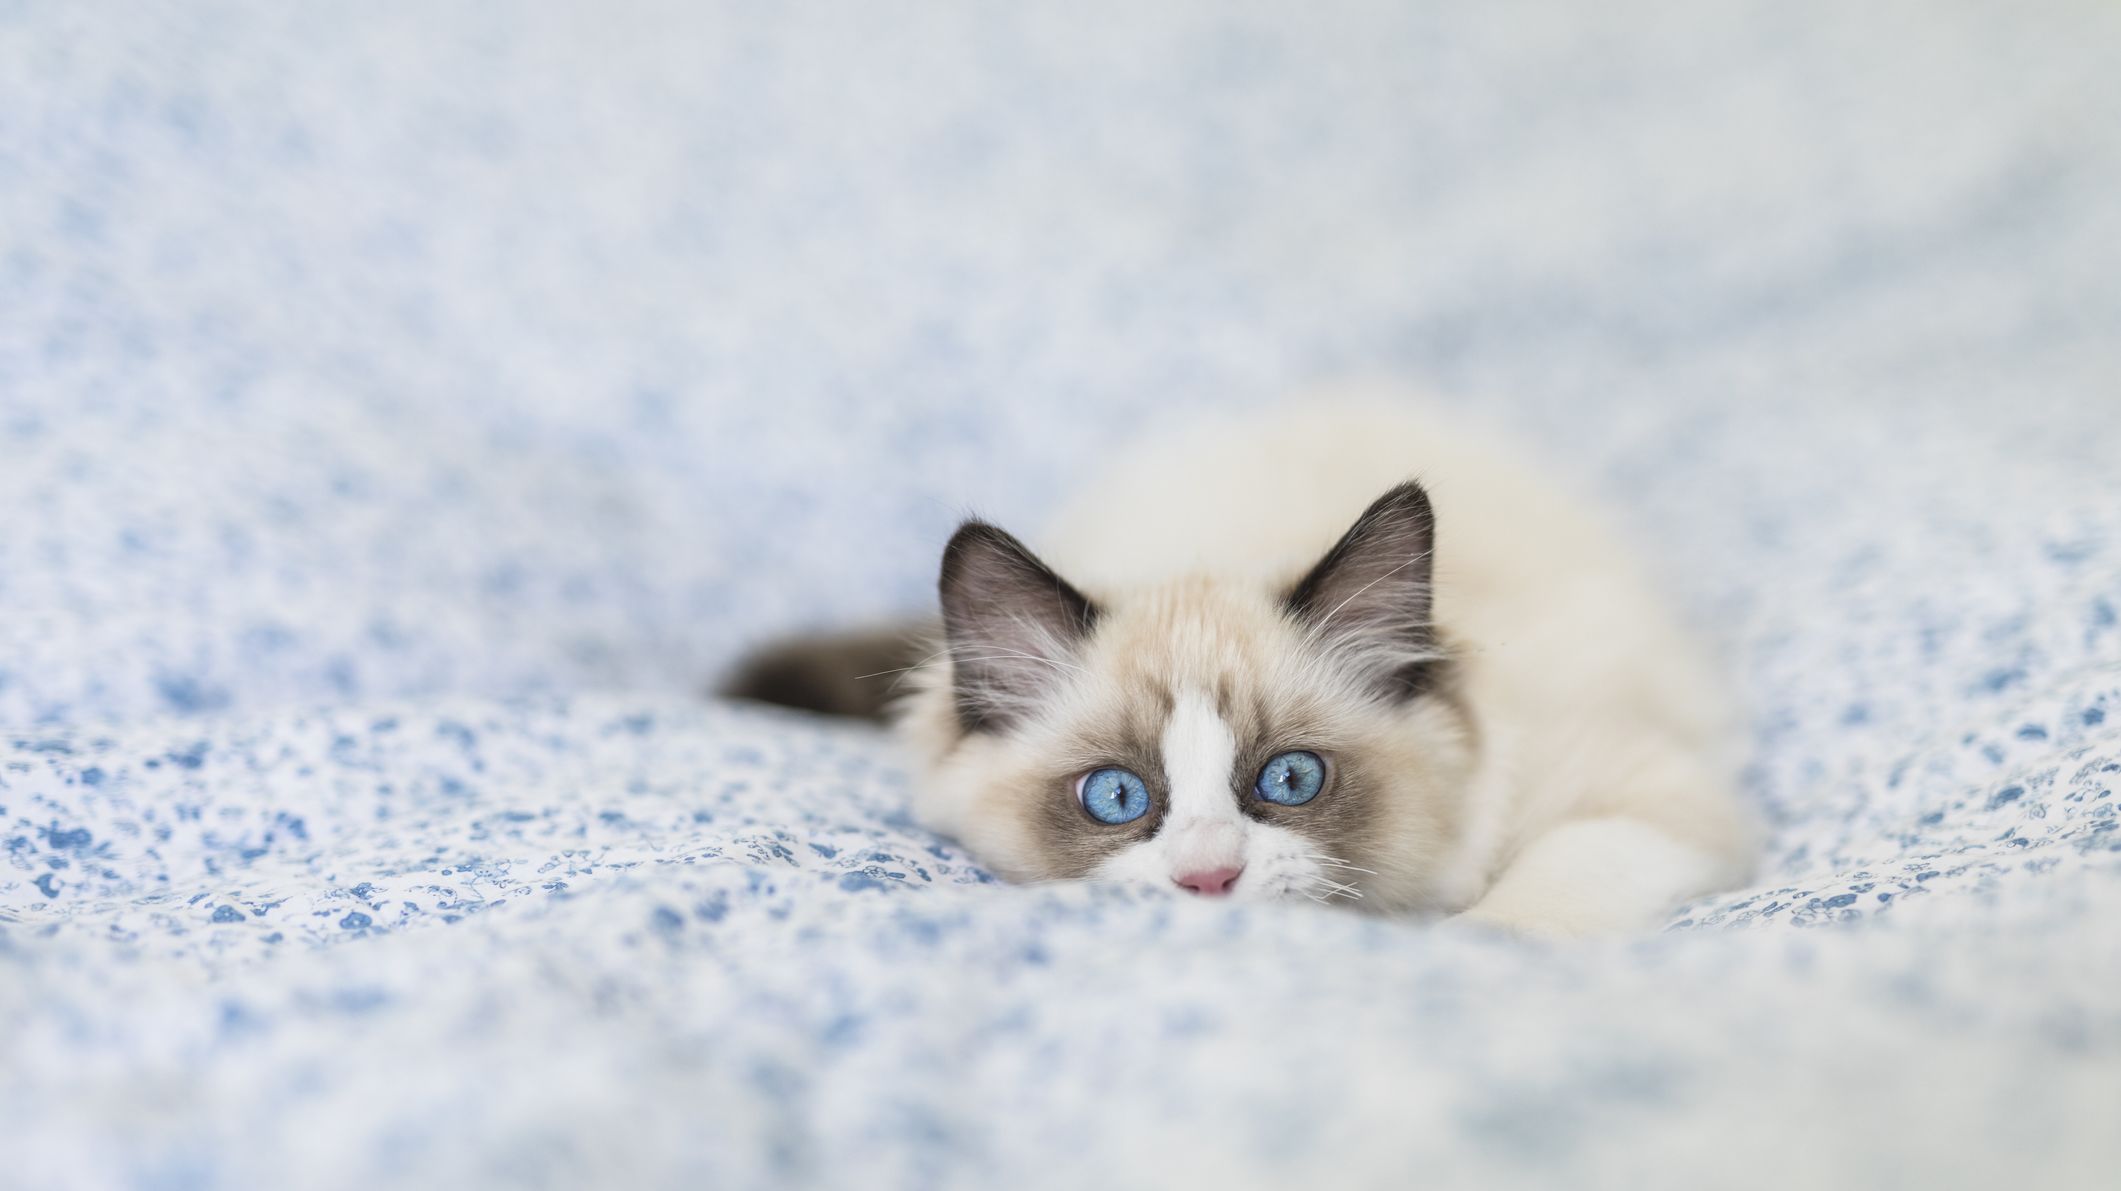 7 Facts About Ragdoll Cats | Mental Floss